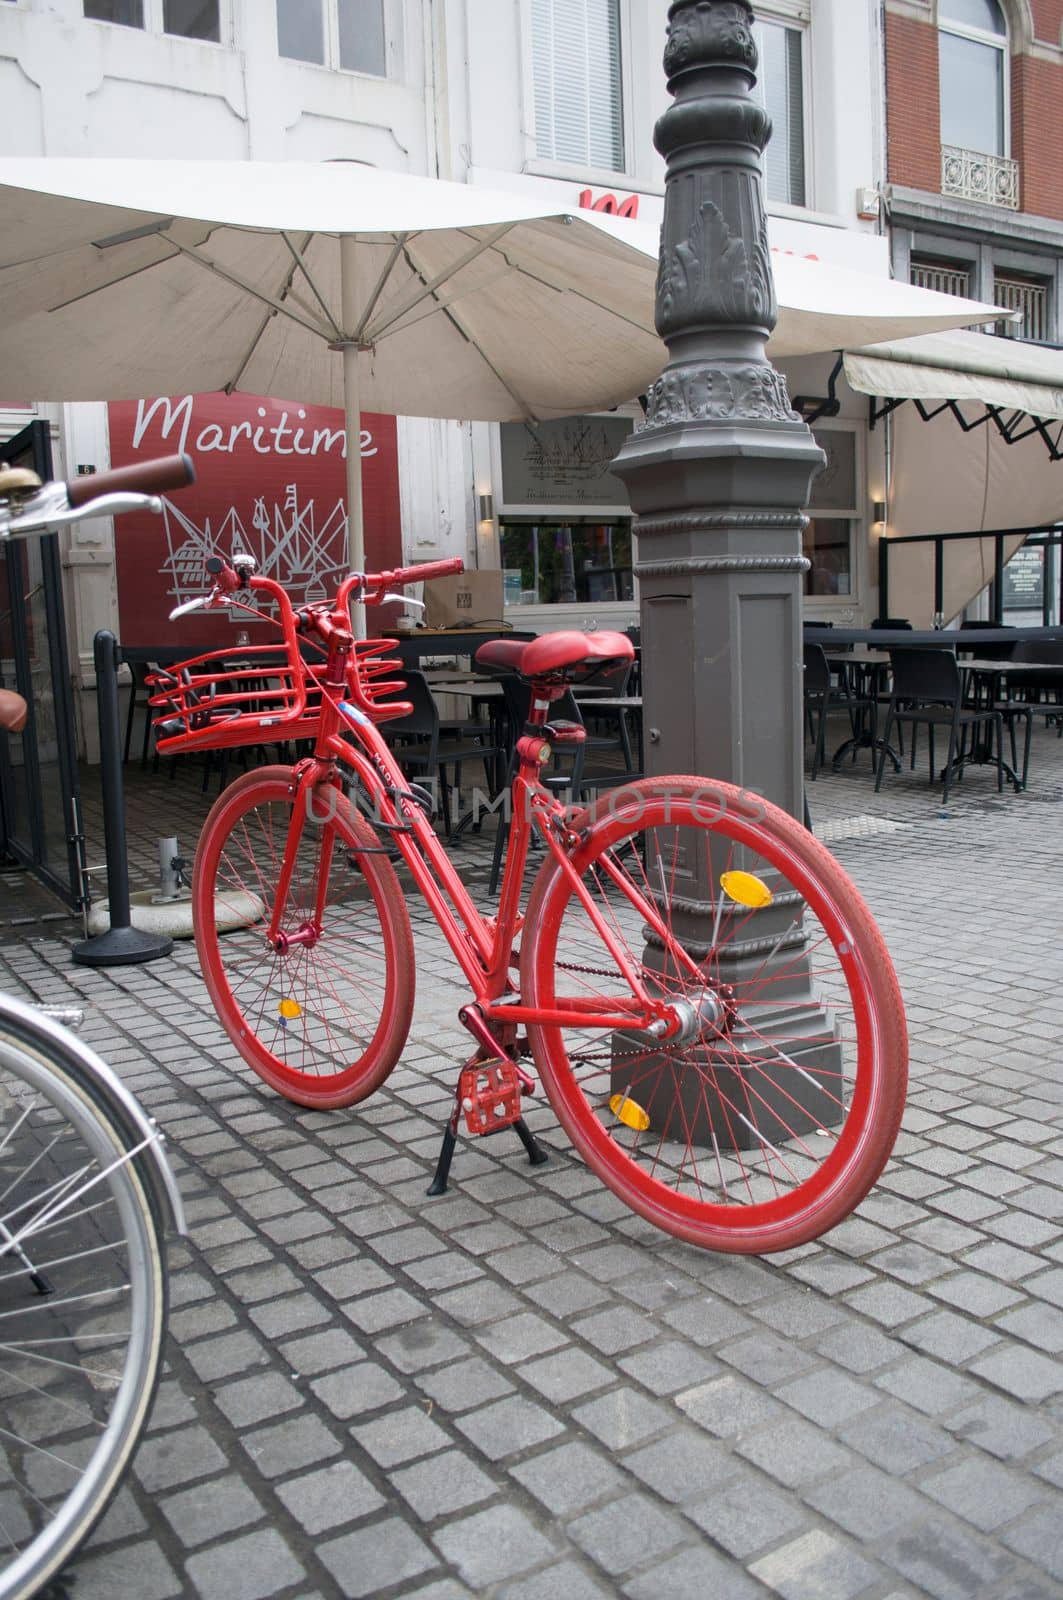 a red-painted bicycle in front of a street cafe, Antwerp, Belgium, 12 July 2019 by KaterinaDalemans